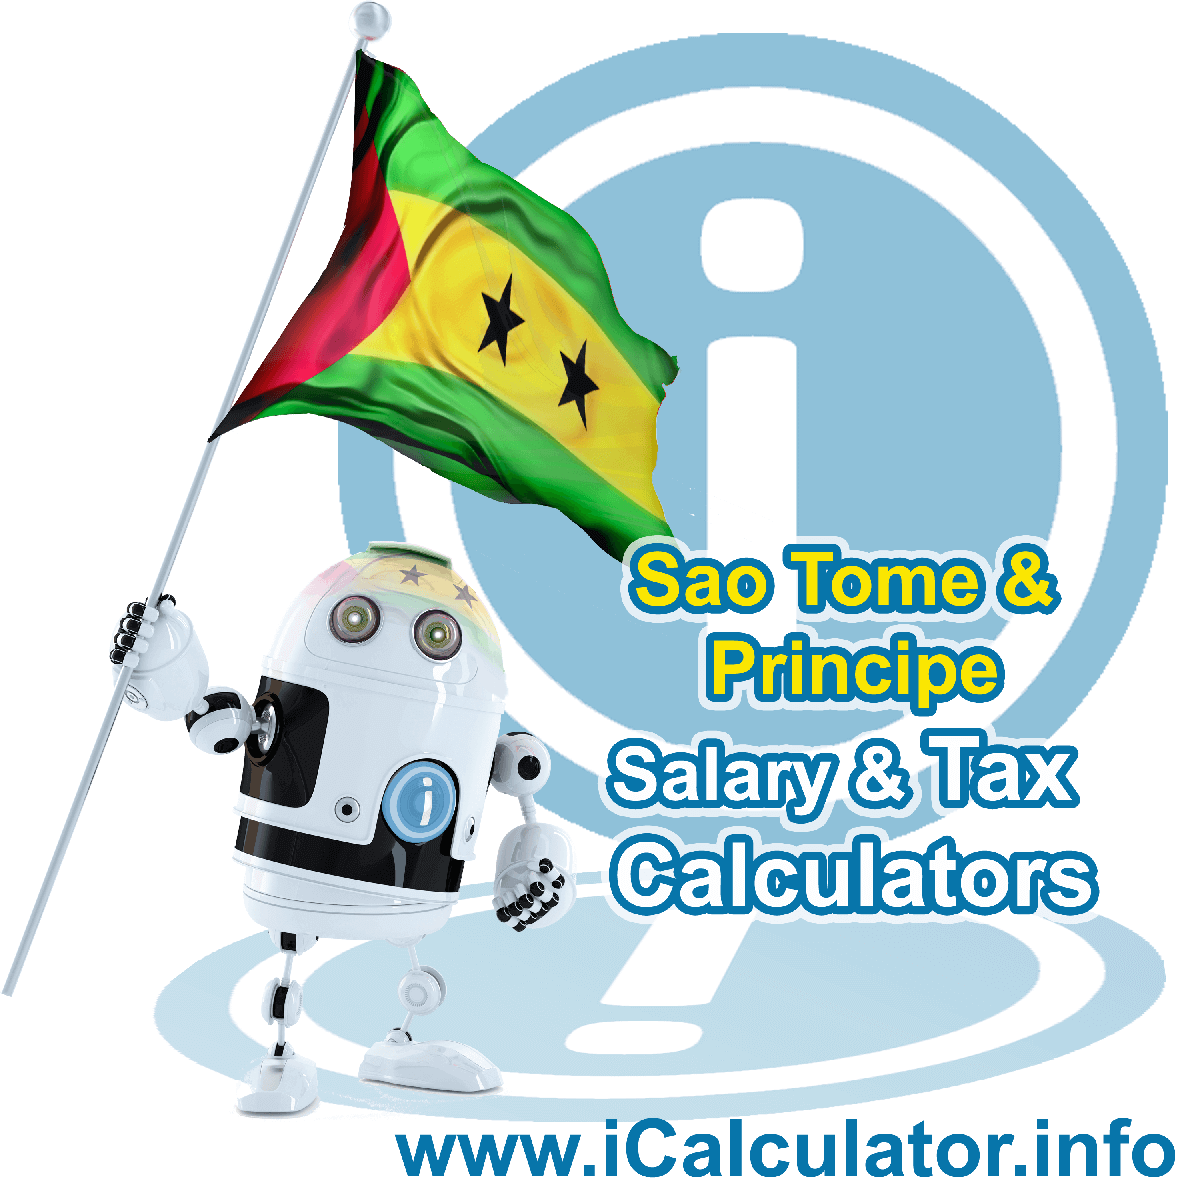 Sao Tome And Principe Wage Calculator. This image shows the Sao Tome And Principe flag and information relating to the tax formula for the Sao Tome And Principe Tax Calculator